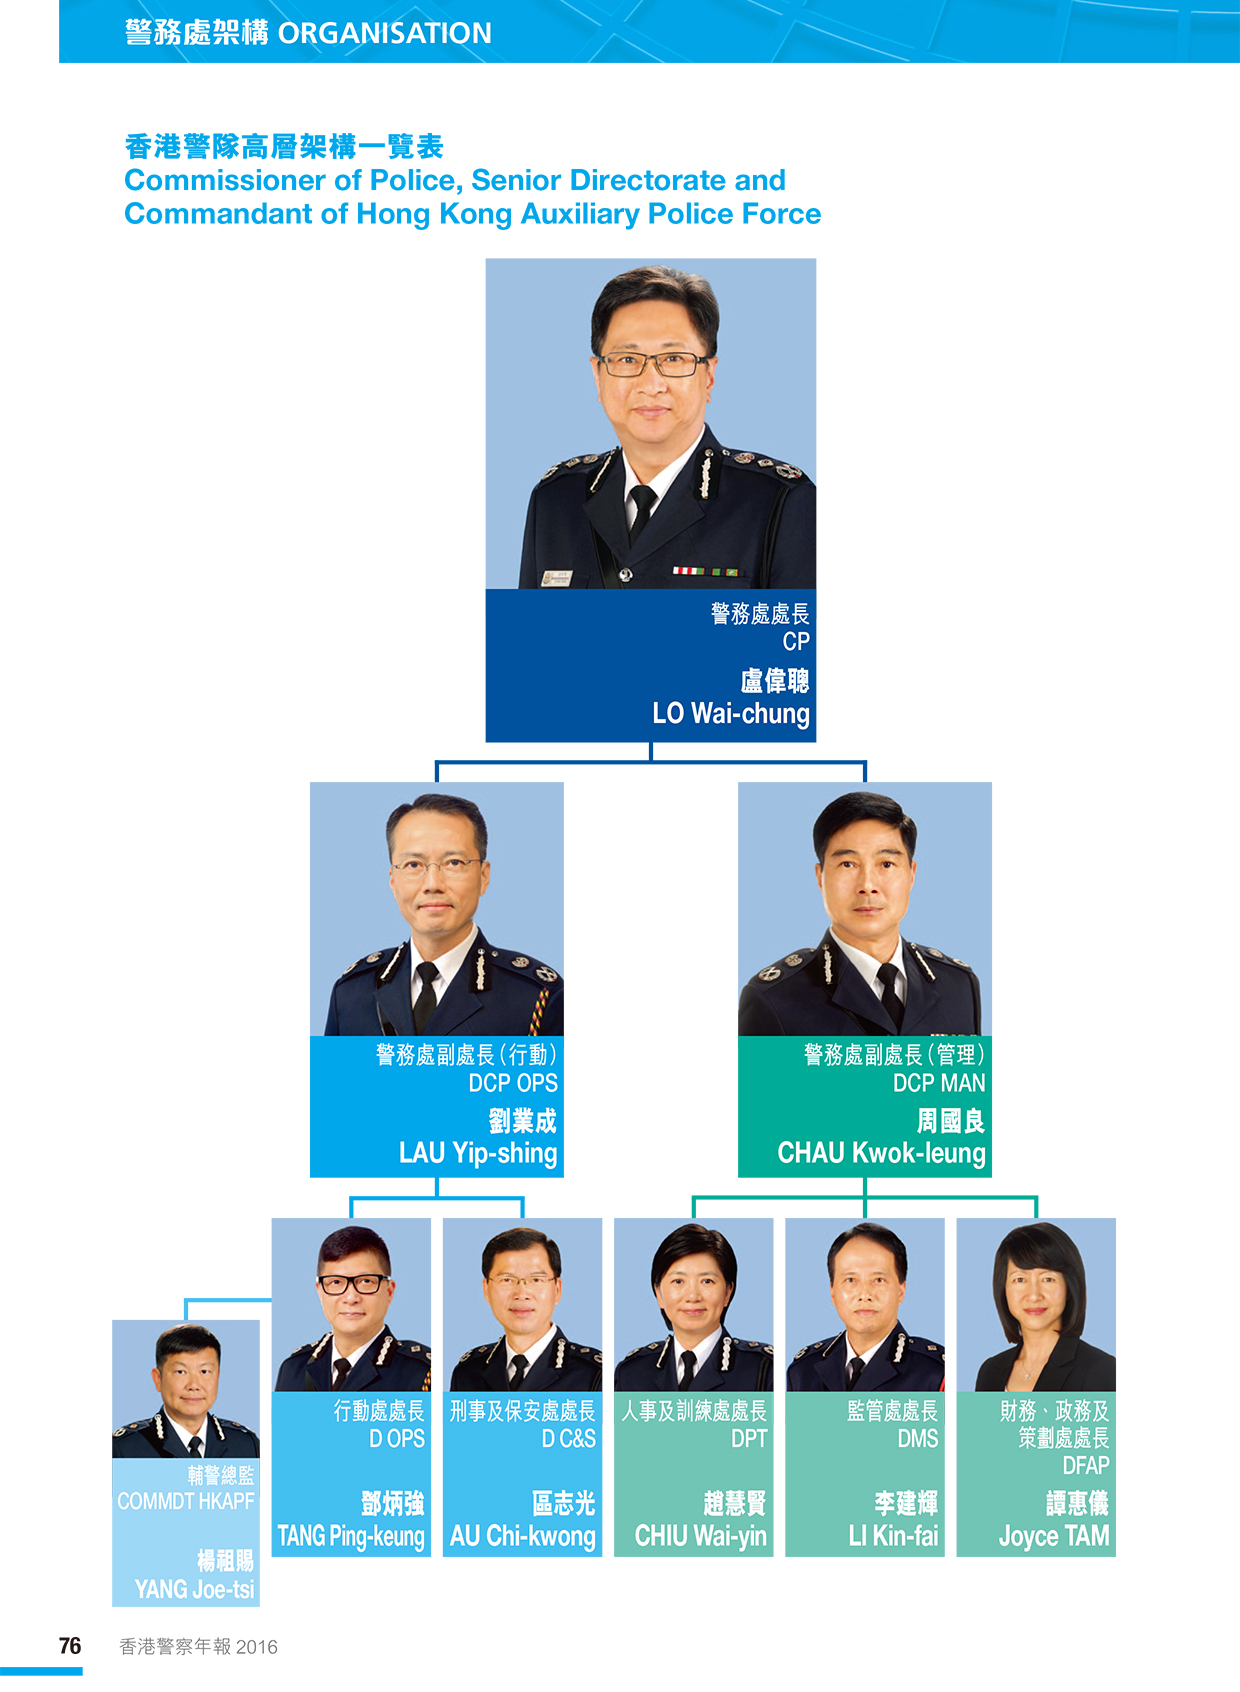 Commissioner of Police, Senior Directorate and Commandant of Hong Kong Auxiliary Police Force